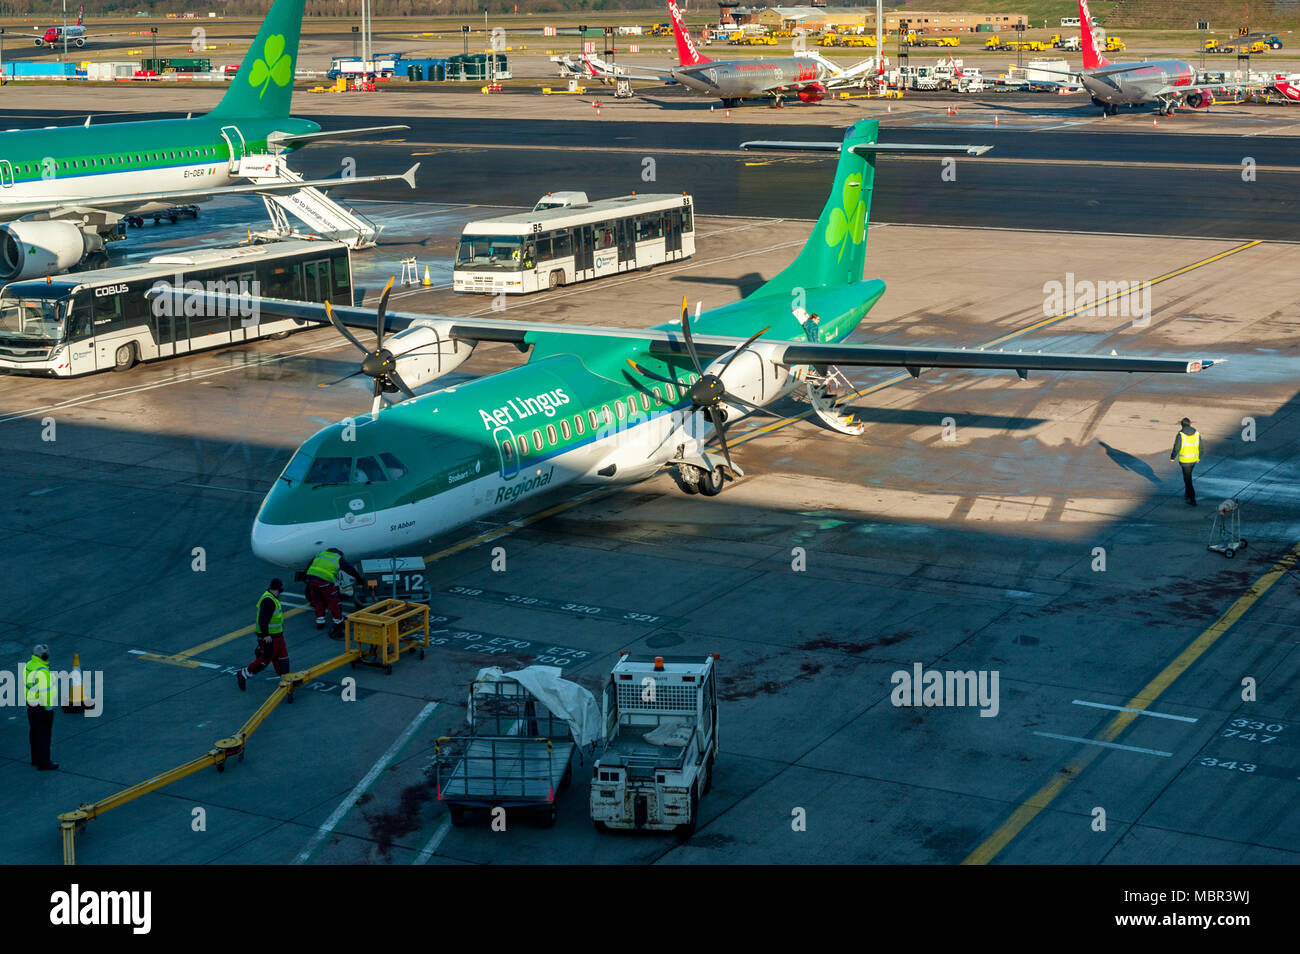 Aer Lingus ATR 72-600 propeller aircraft on the apron at Birmingham Airport, West Midlands, UK. Stock Photo